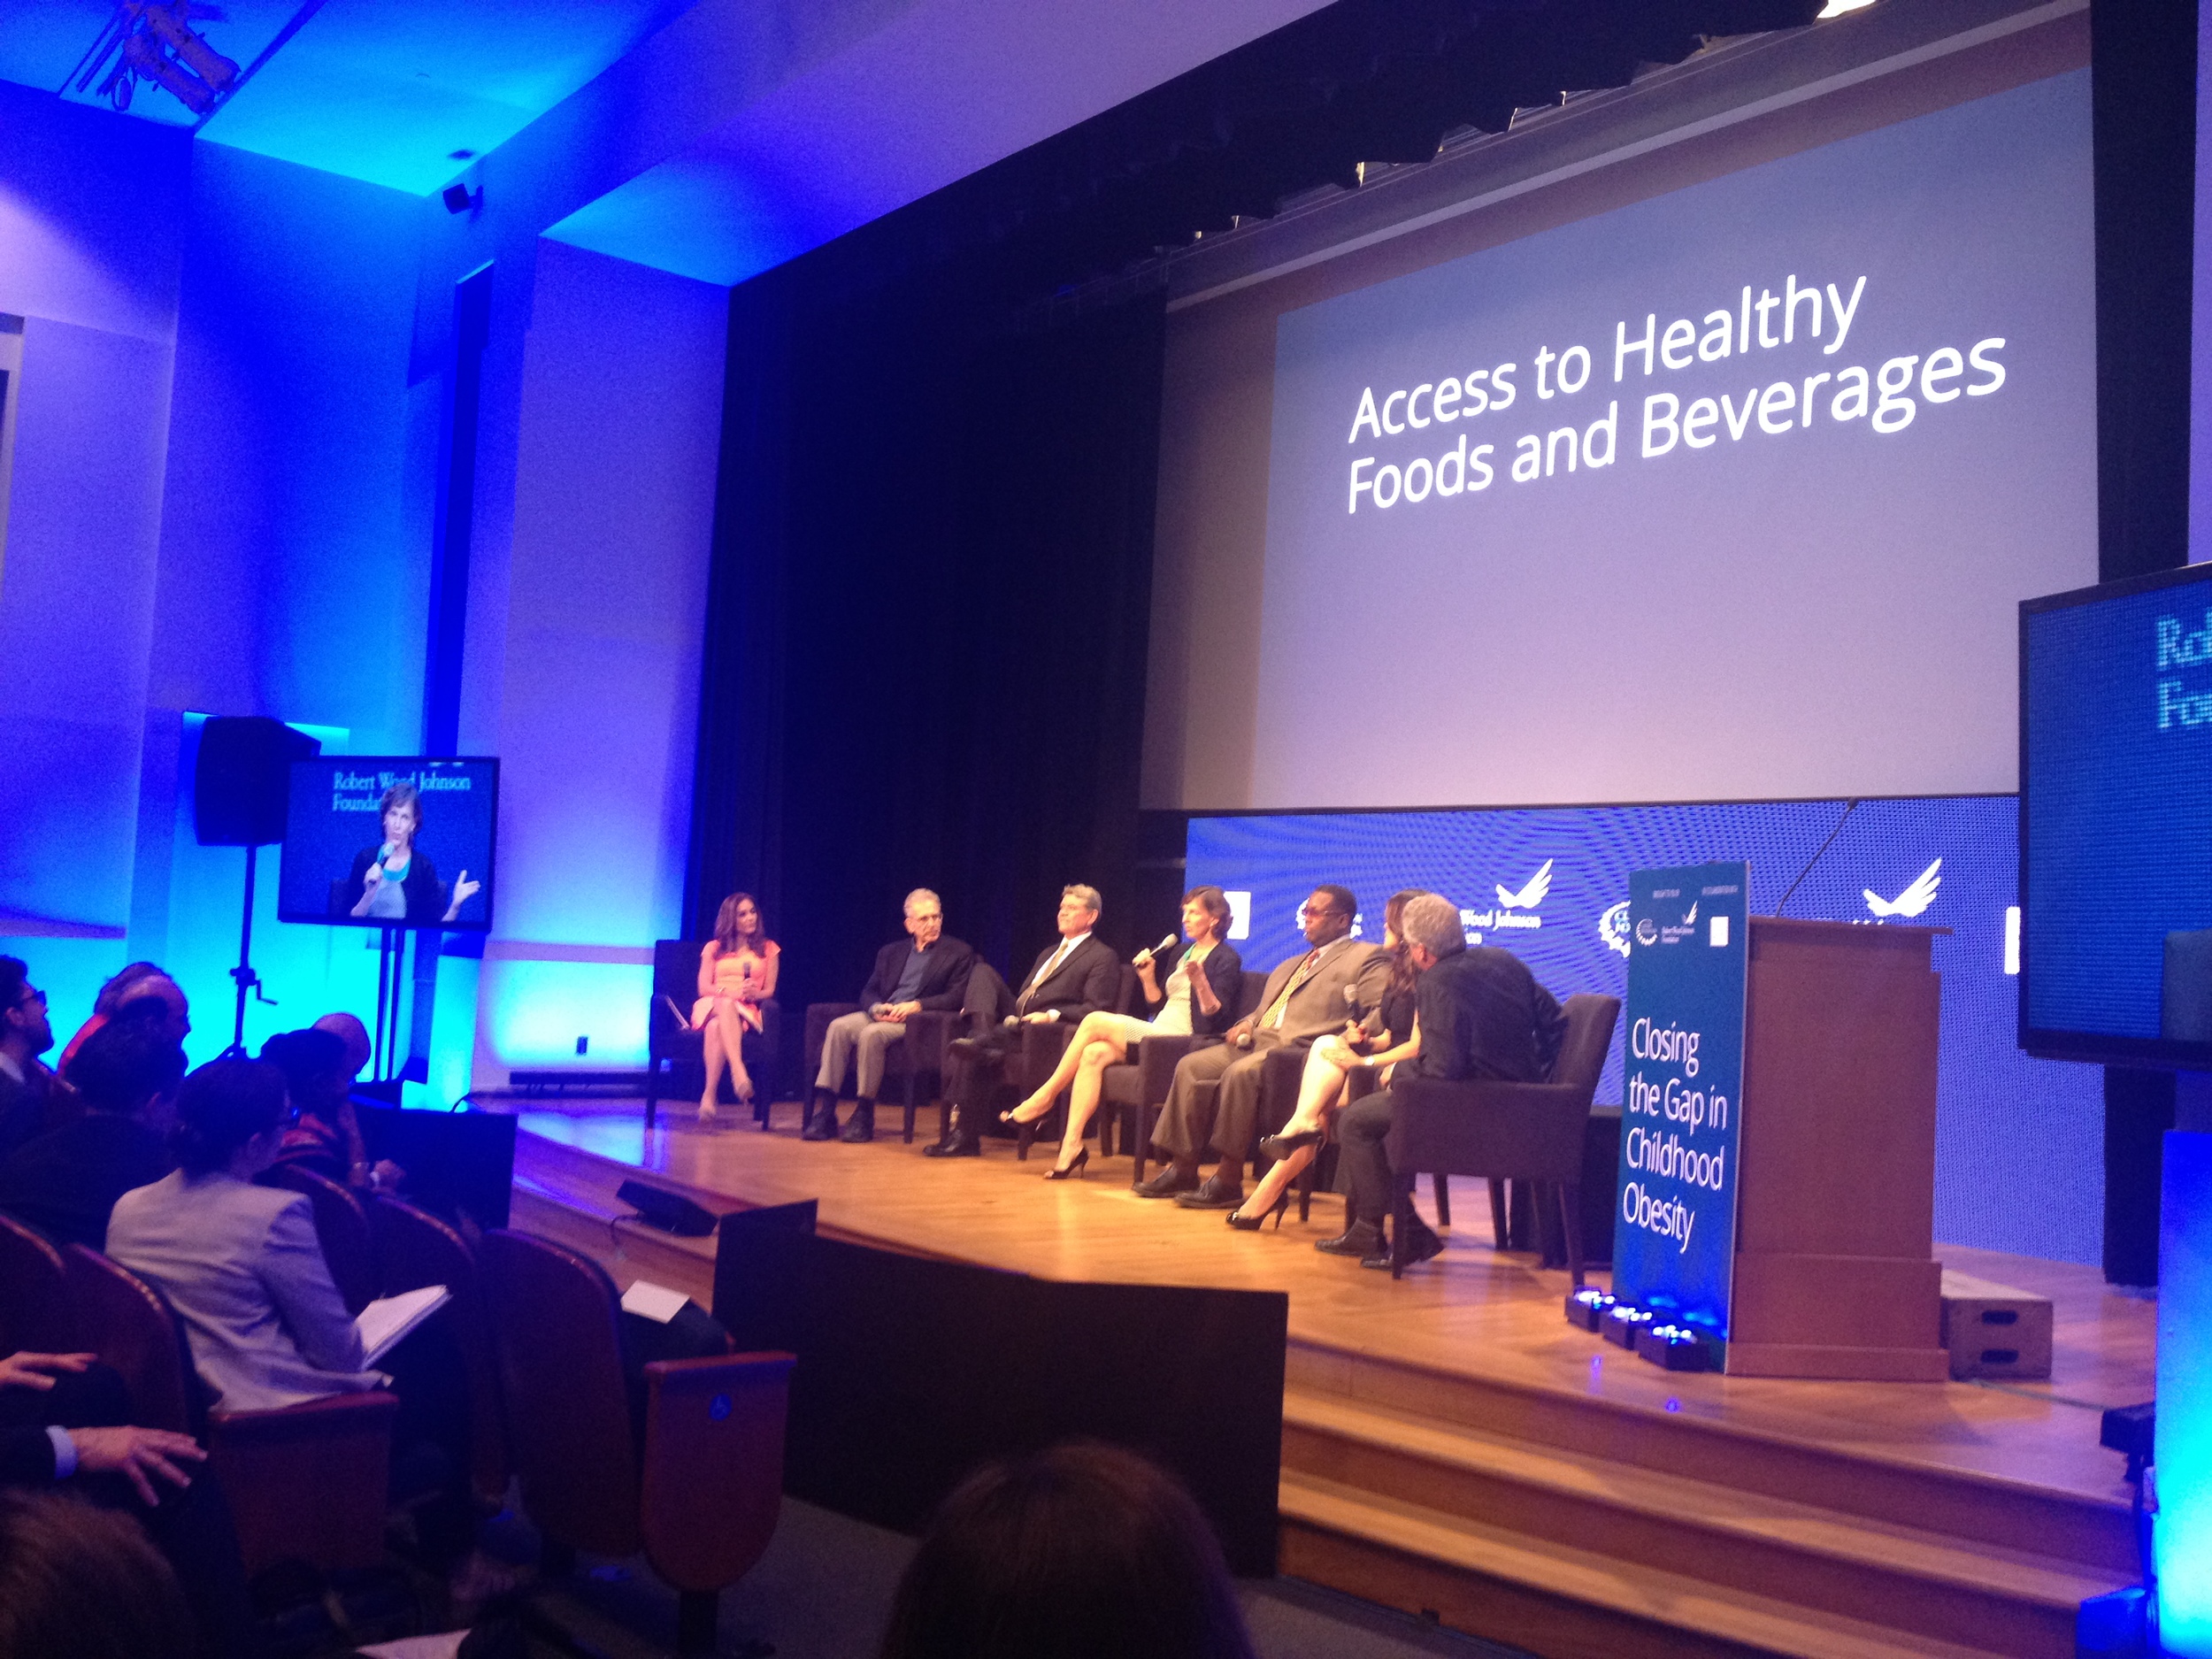 Access to Healthy Foods Panel Discussion moderated by Joy Bauer from the Today Show, NBC News, and panelists: Susan Neely, President and CEO, American Beverage Association, Wendell Pierce, Actor and President, Sterling Farms, Kevin McCartney, CEO, B…